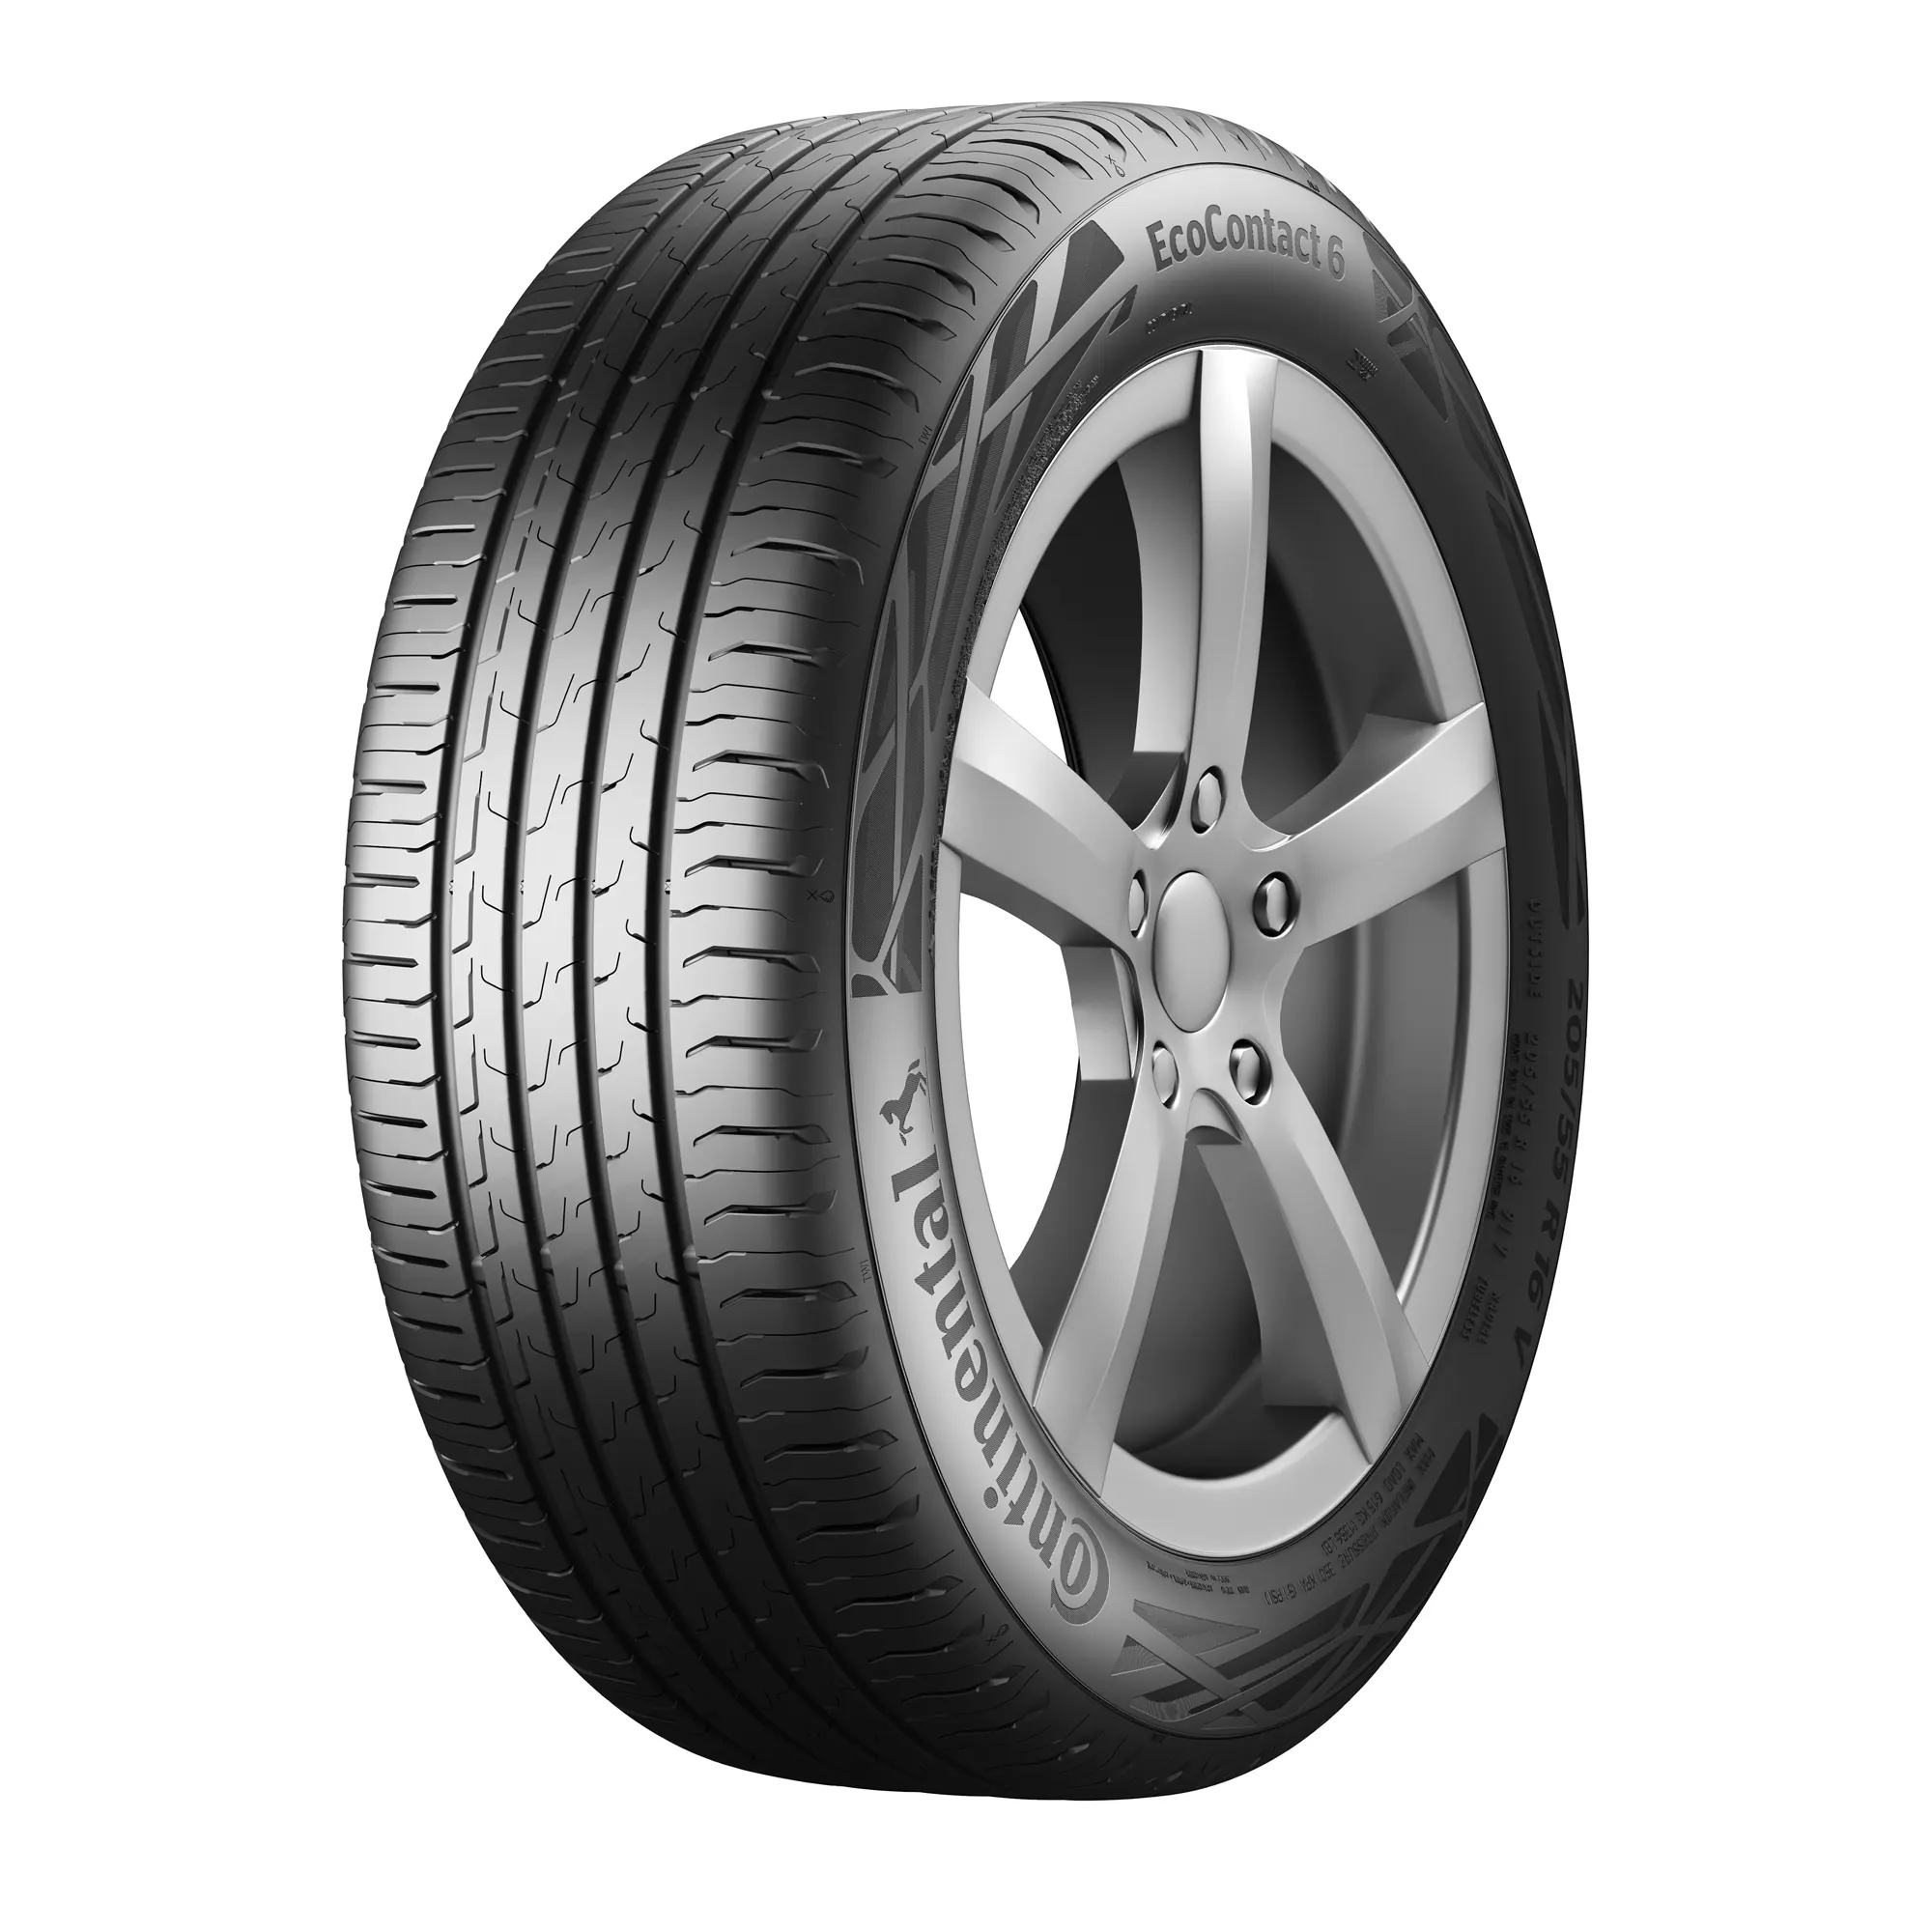 Шина 185/65R14 86H Continental EcoContact 6